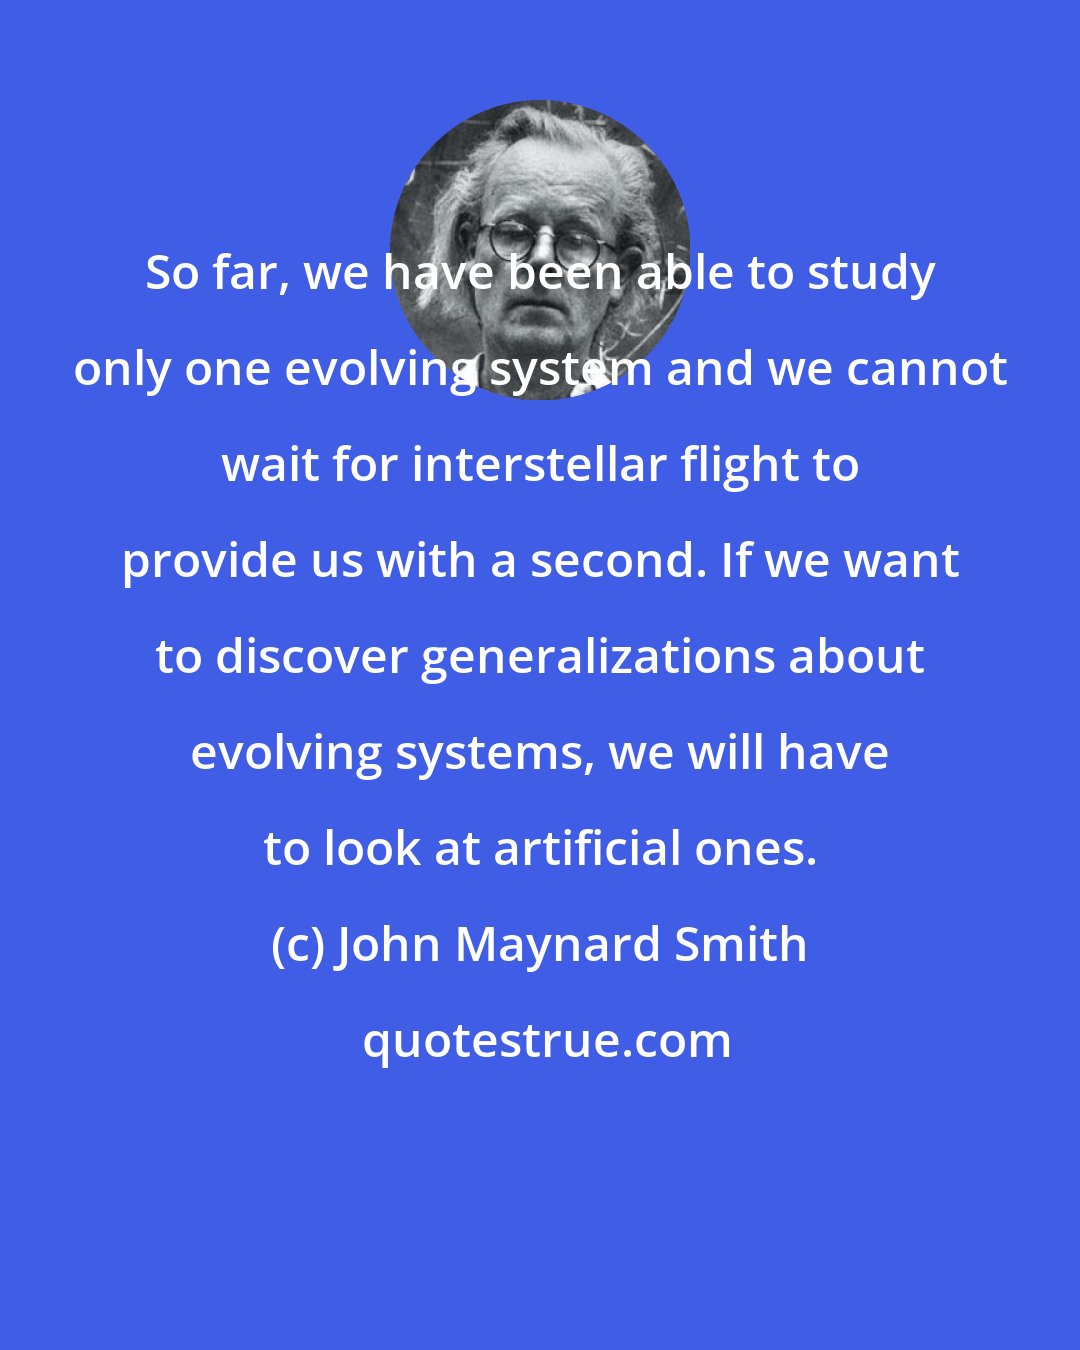 John Maynard Smith: So far, we have been able to study only one evolving system and we cannot wait for interstellar flight to provide us with a second. If we want to discover generalizations about evolving systems, we will have to look at artificial ones.